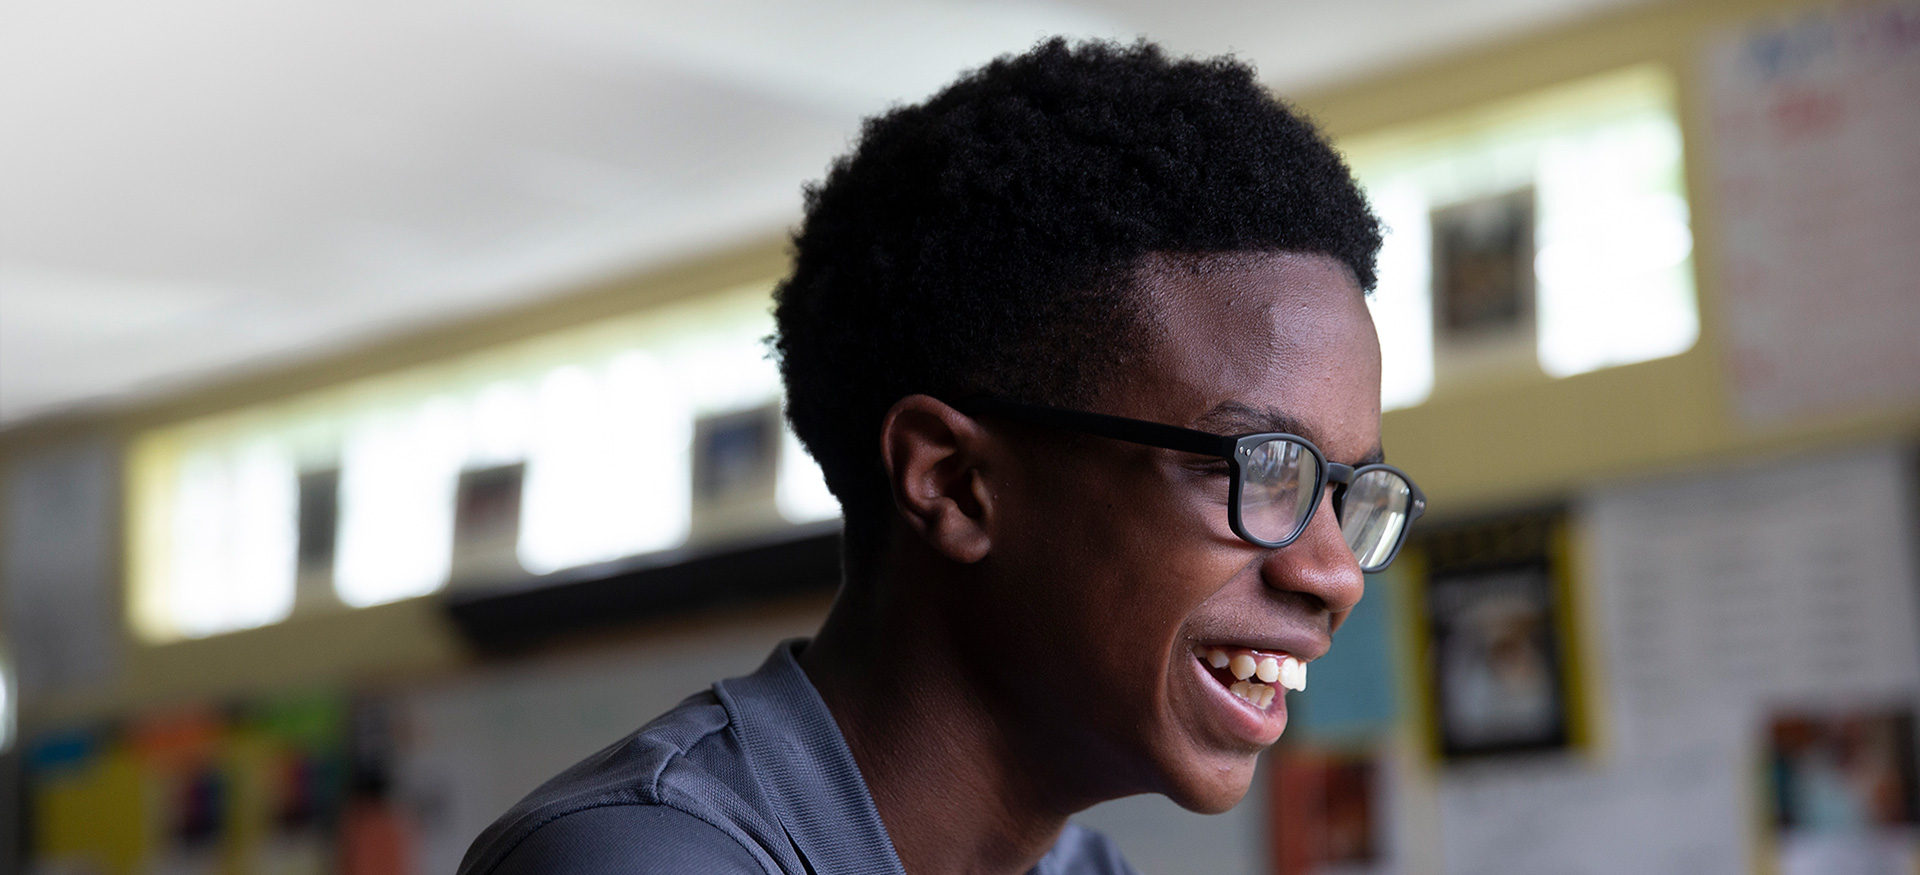 Student wearing glasses looking to the side and smiling.